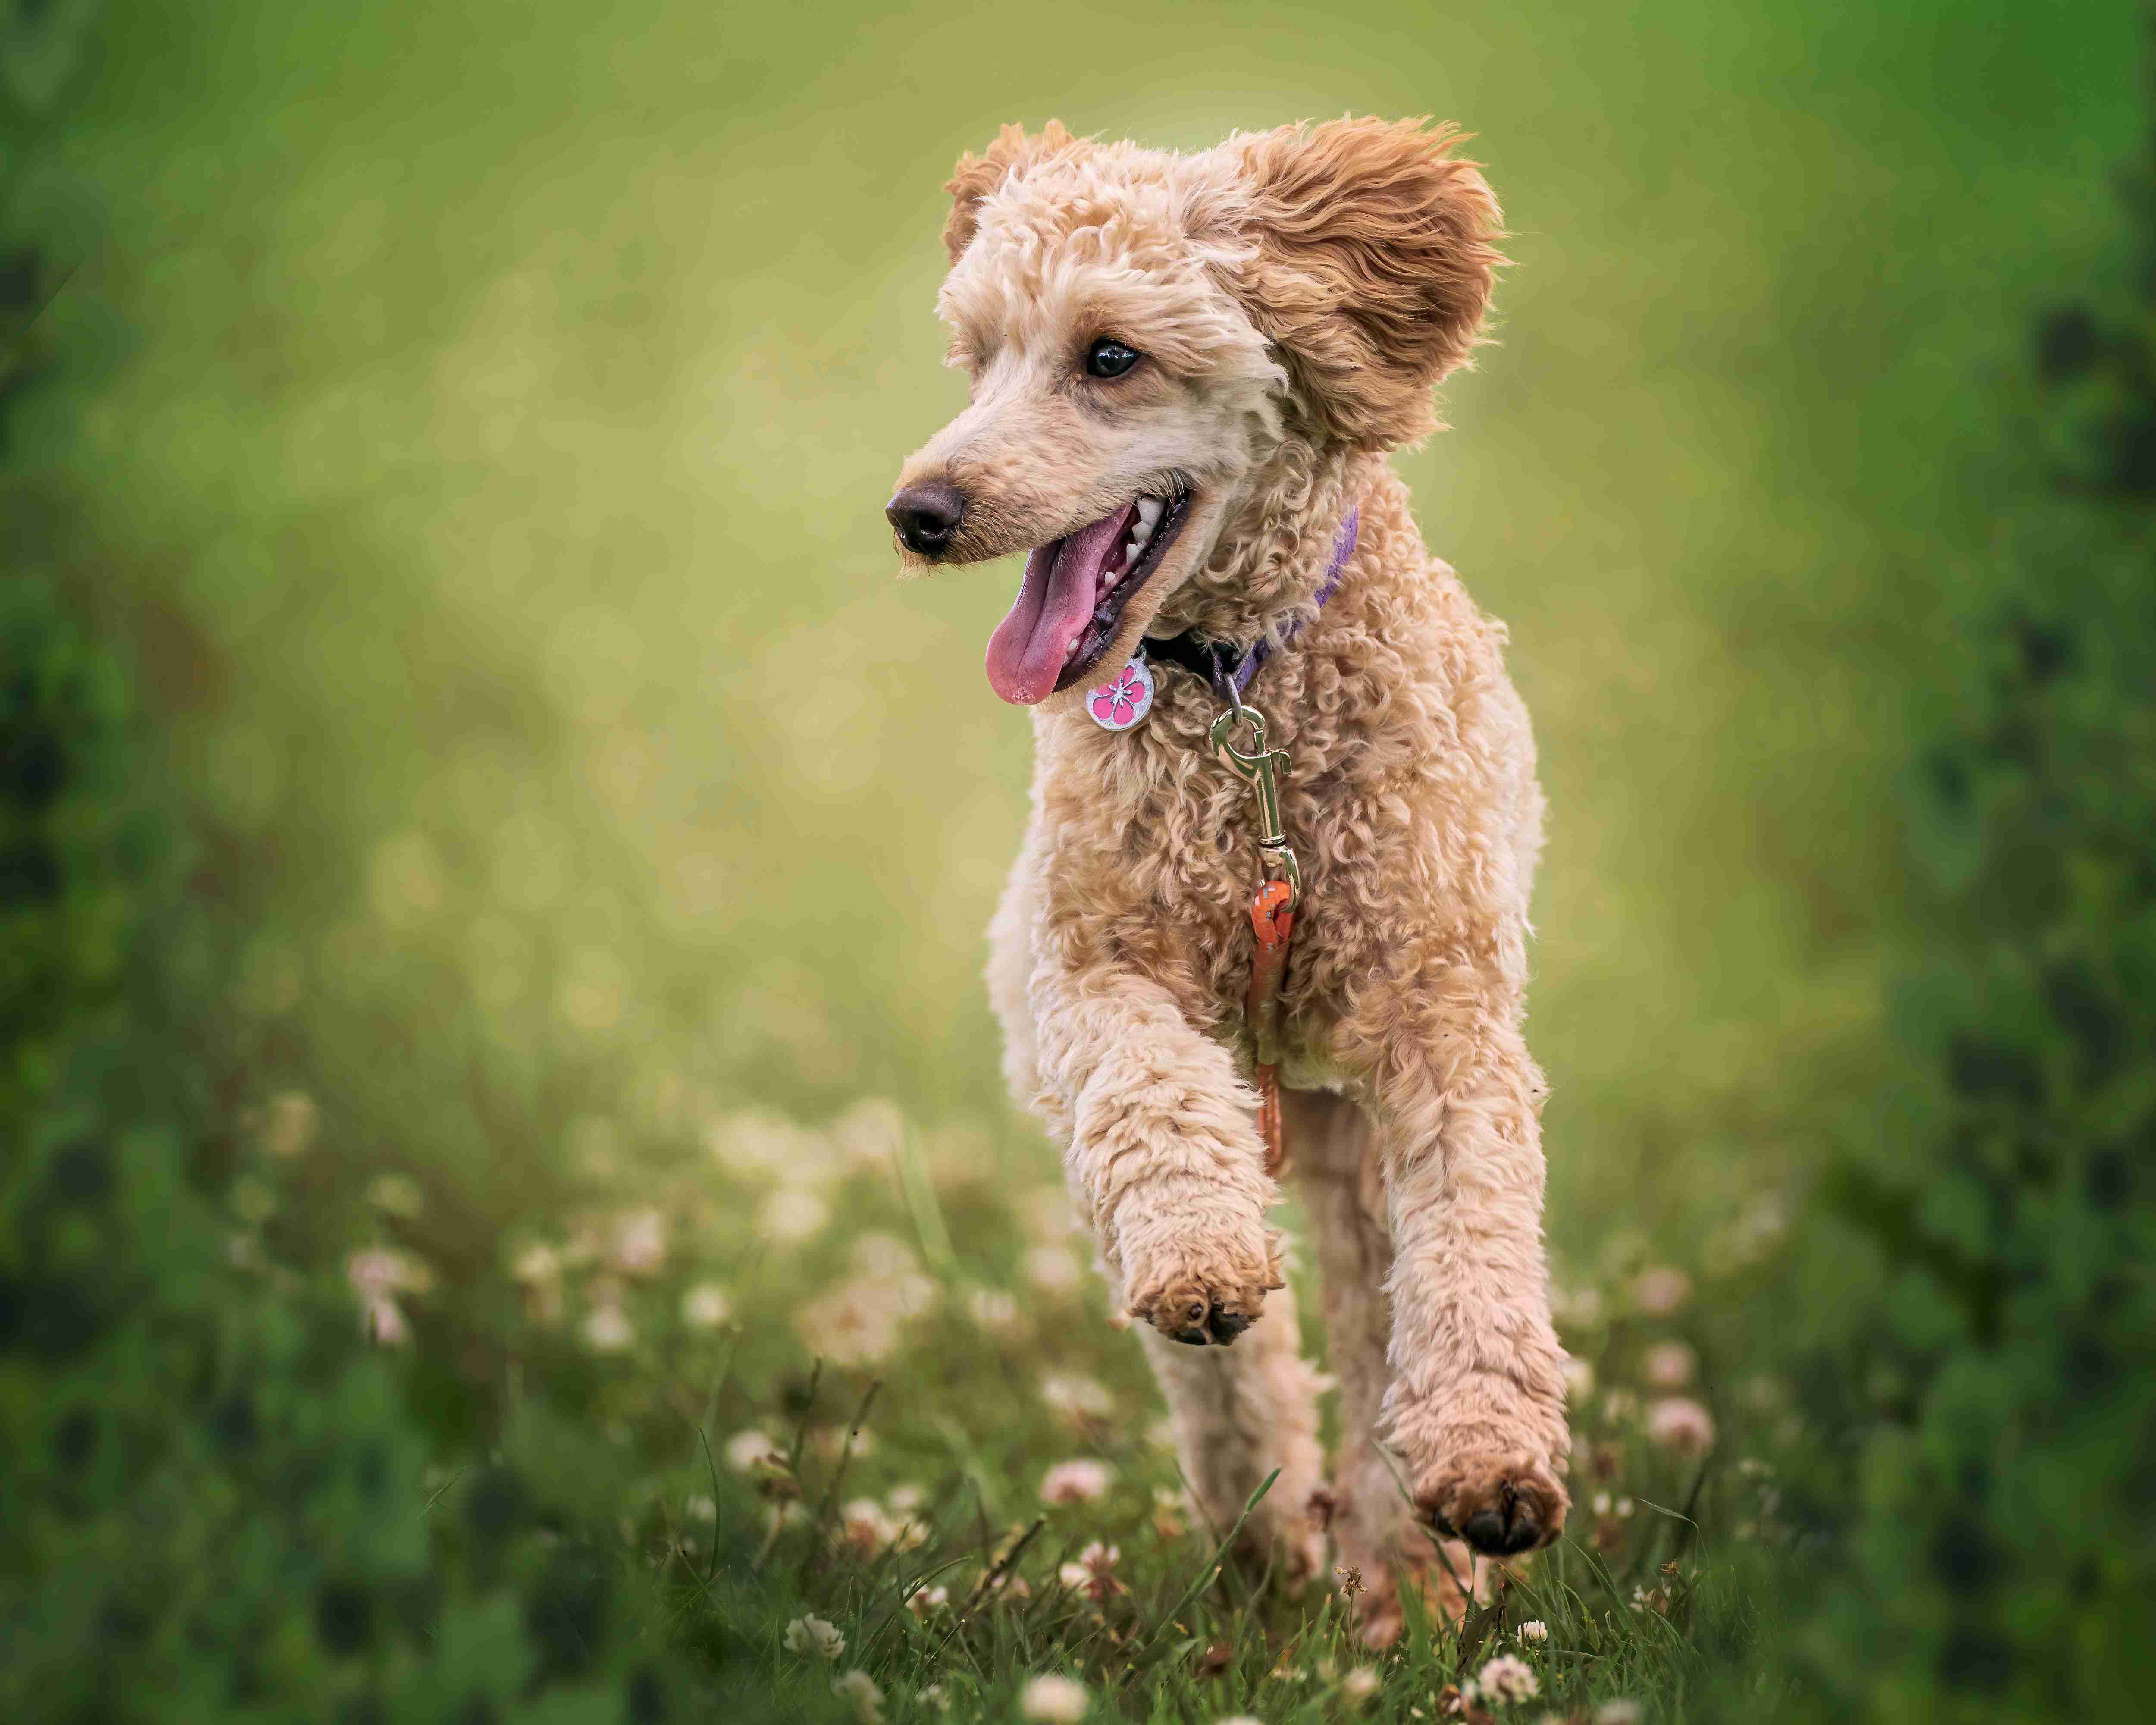 How did you ensure your Poodle puppy received proper exercise and mental stimulation?